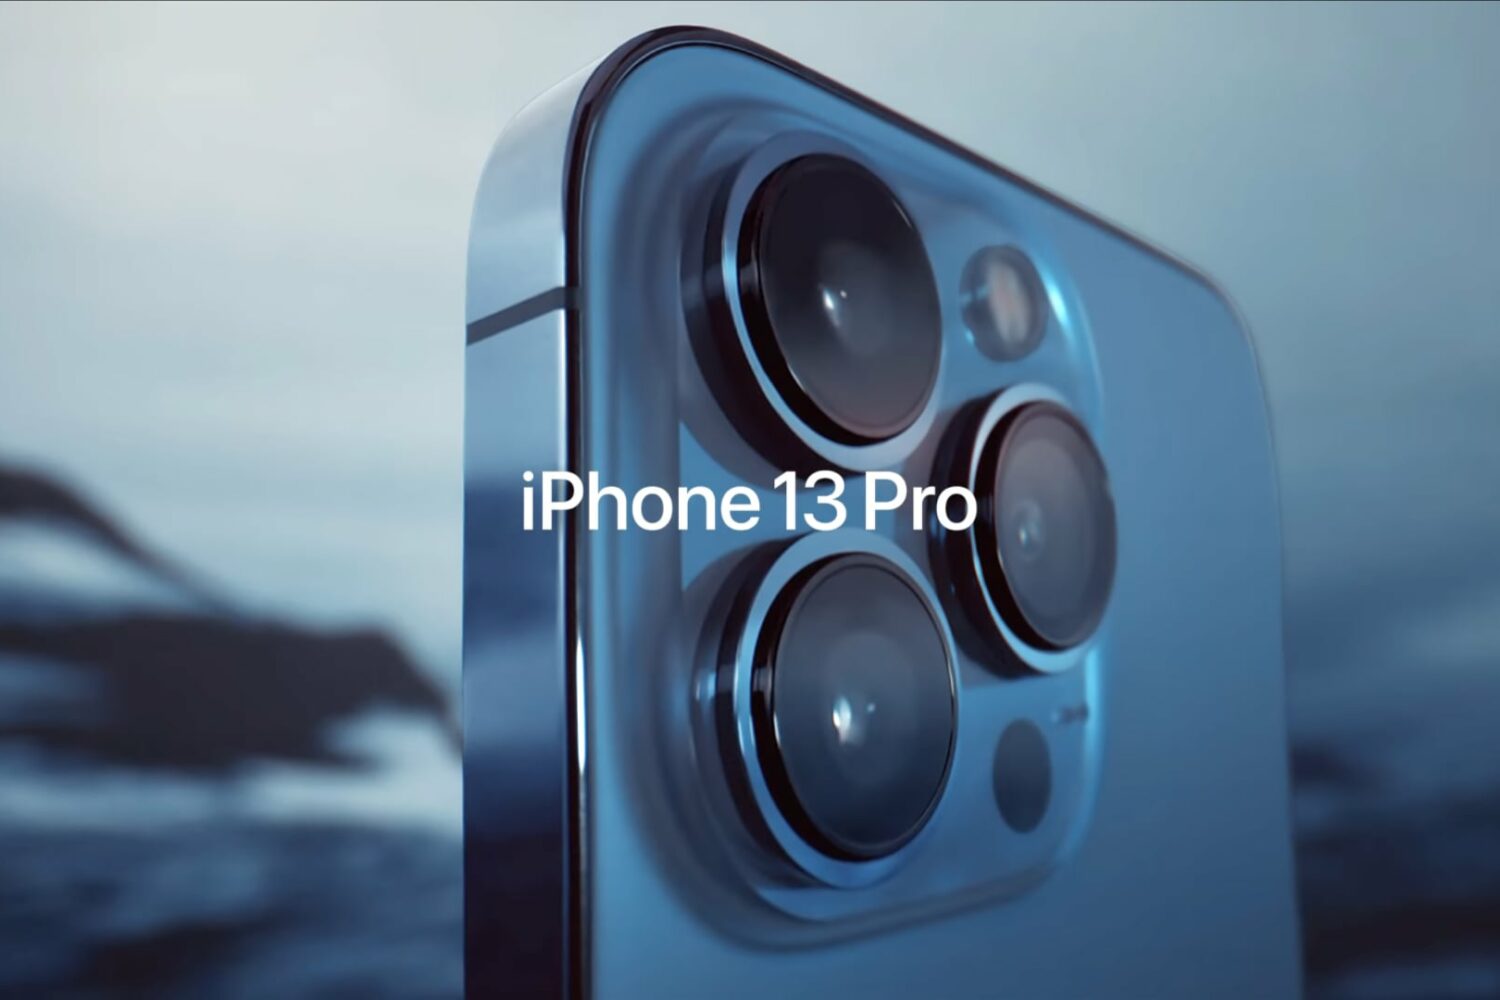 A still image taken from Apple's iPhone 13 Pro introduction video on YouTube, showing a closeup of the three cameras on the back.